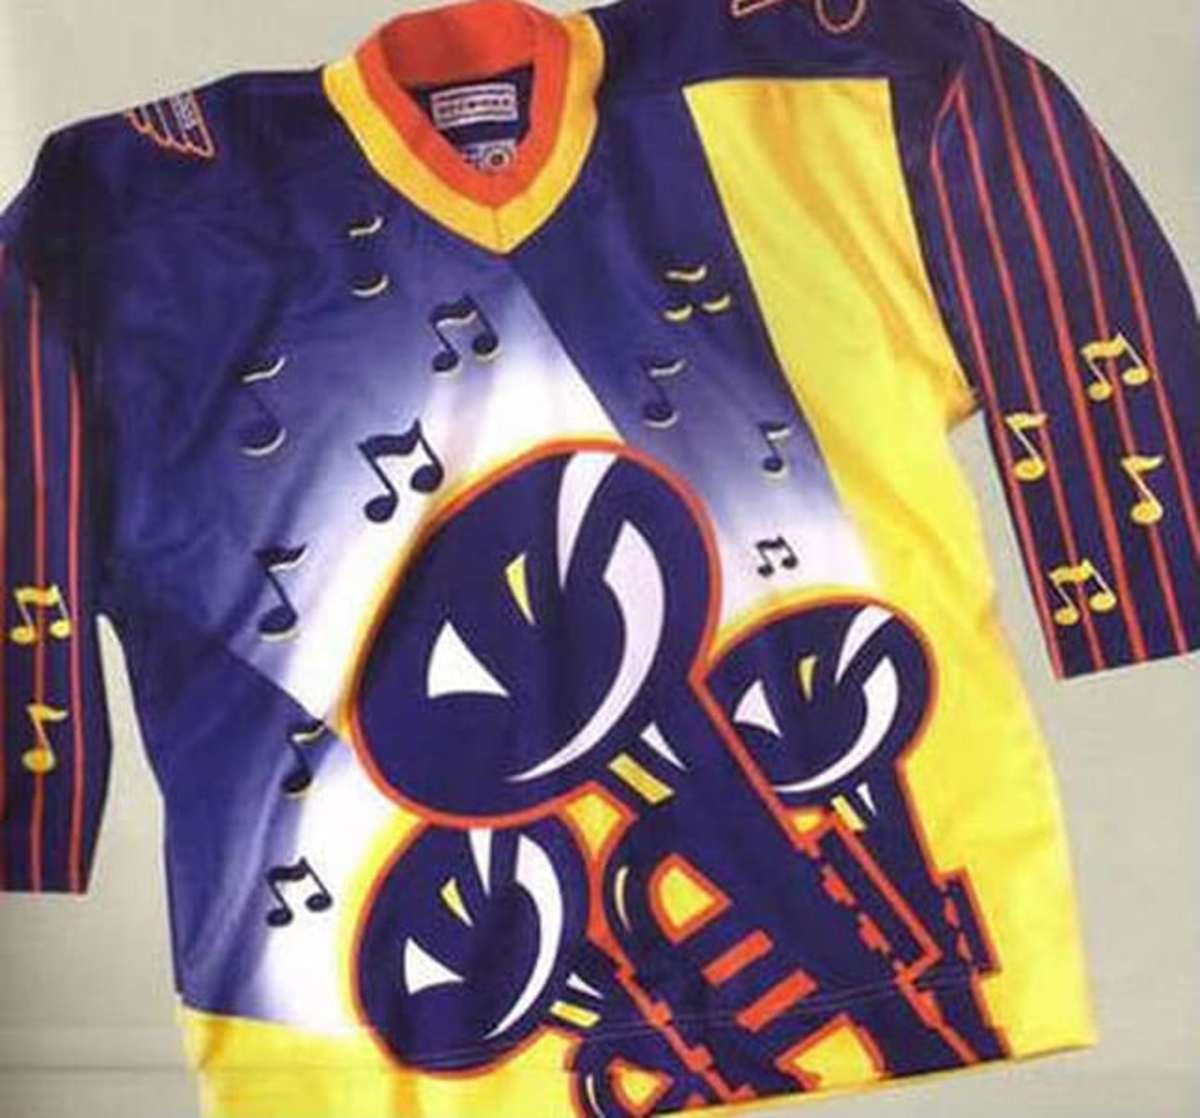 blues outdoor game jersey